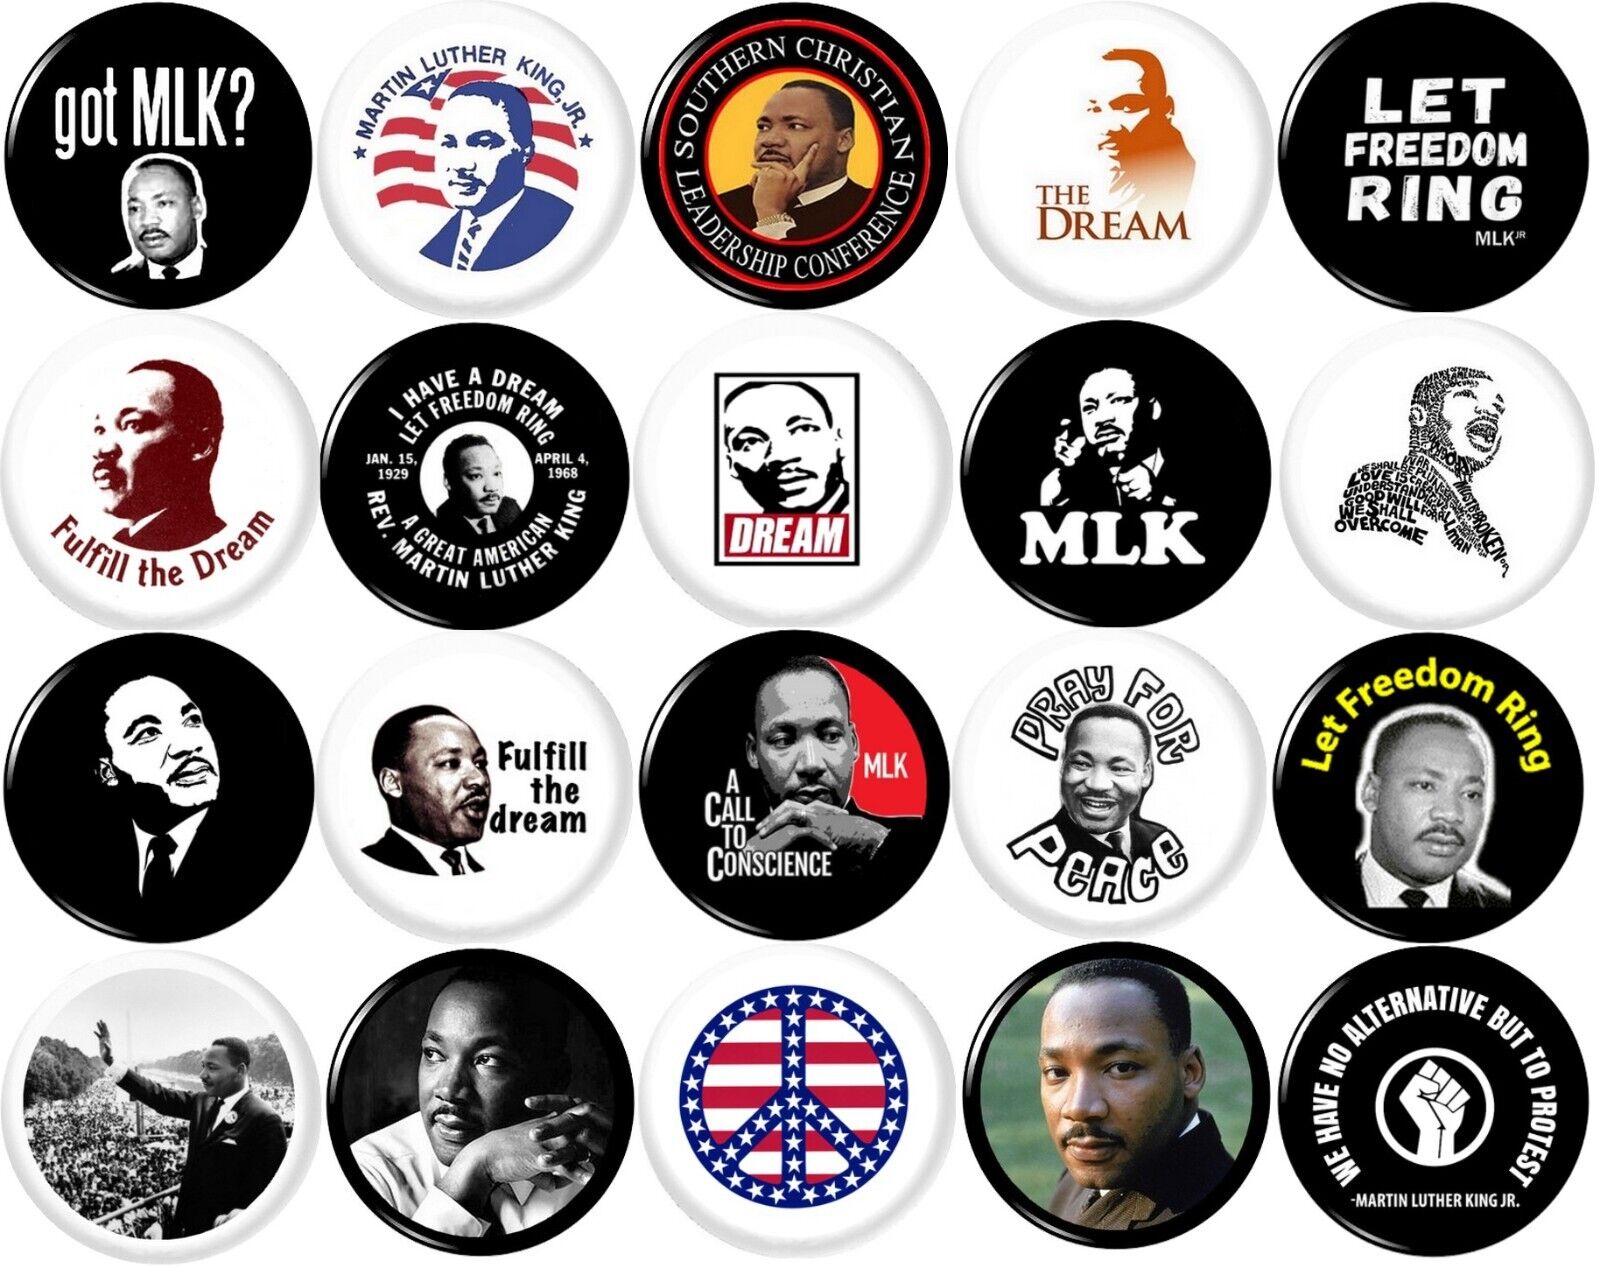 Martin Luther King x 20 NEW 1 inch (25 mm) buttons pins badges MLK Dream RIP BLM